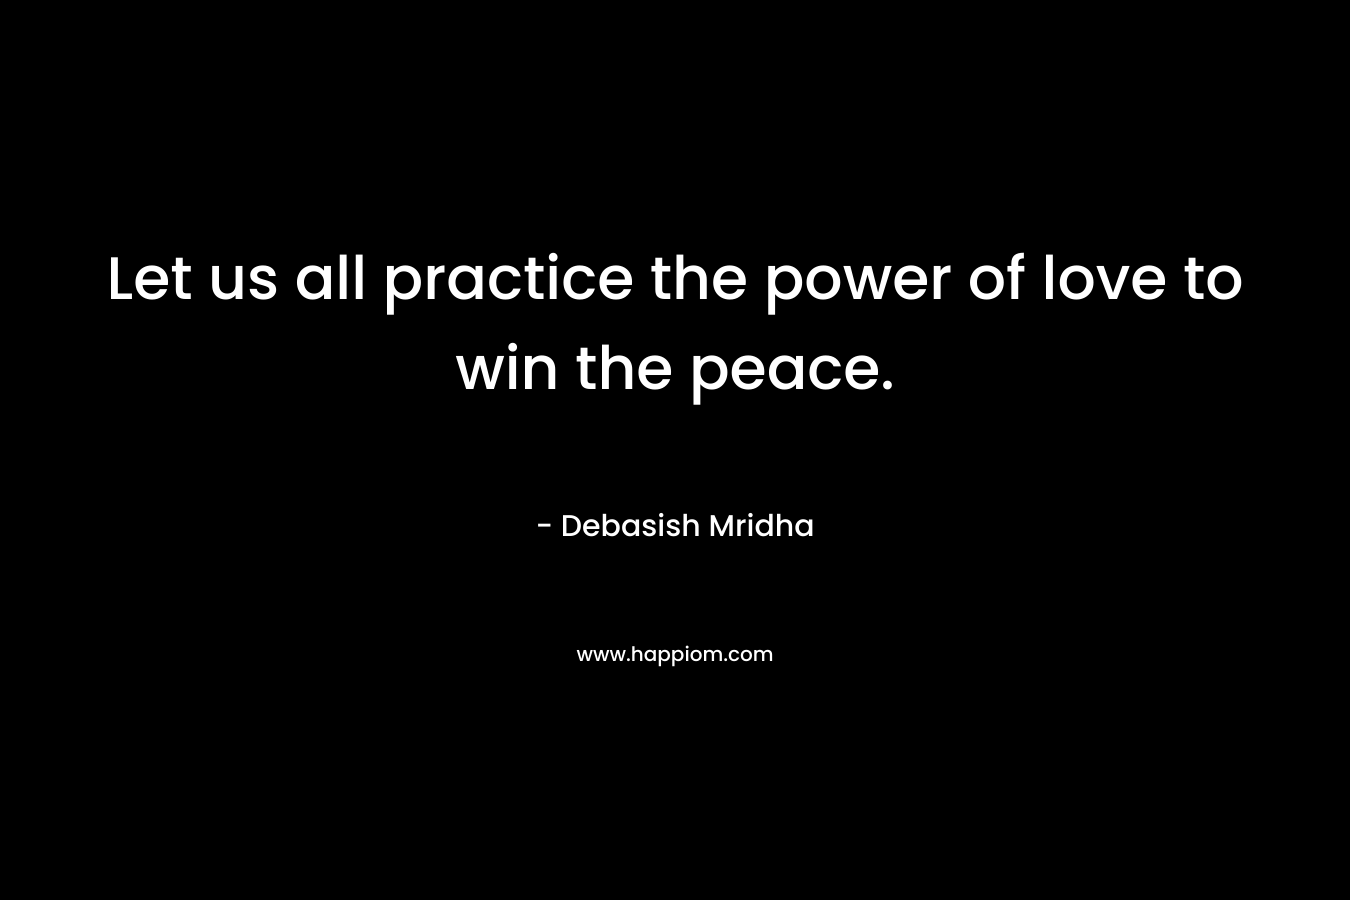 Let us all practice the power of love to win the peace.